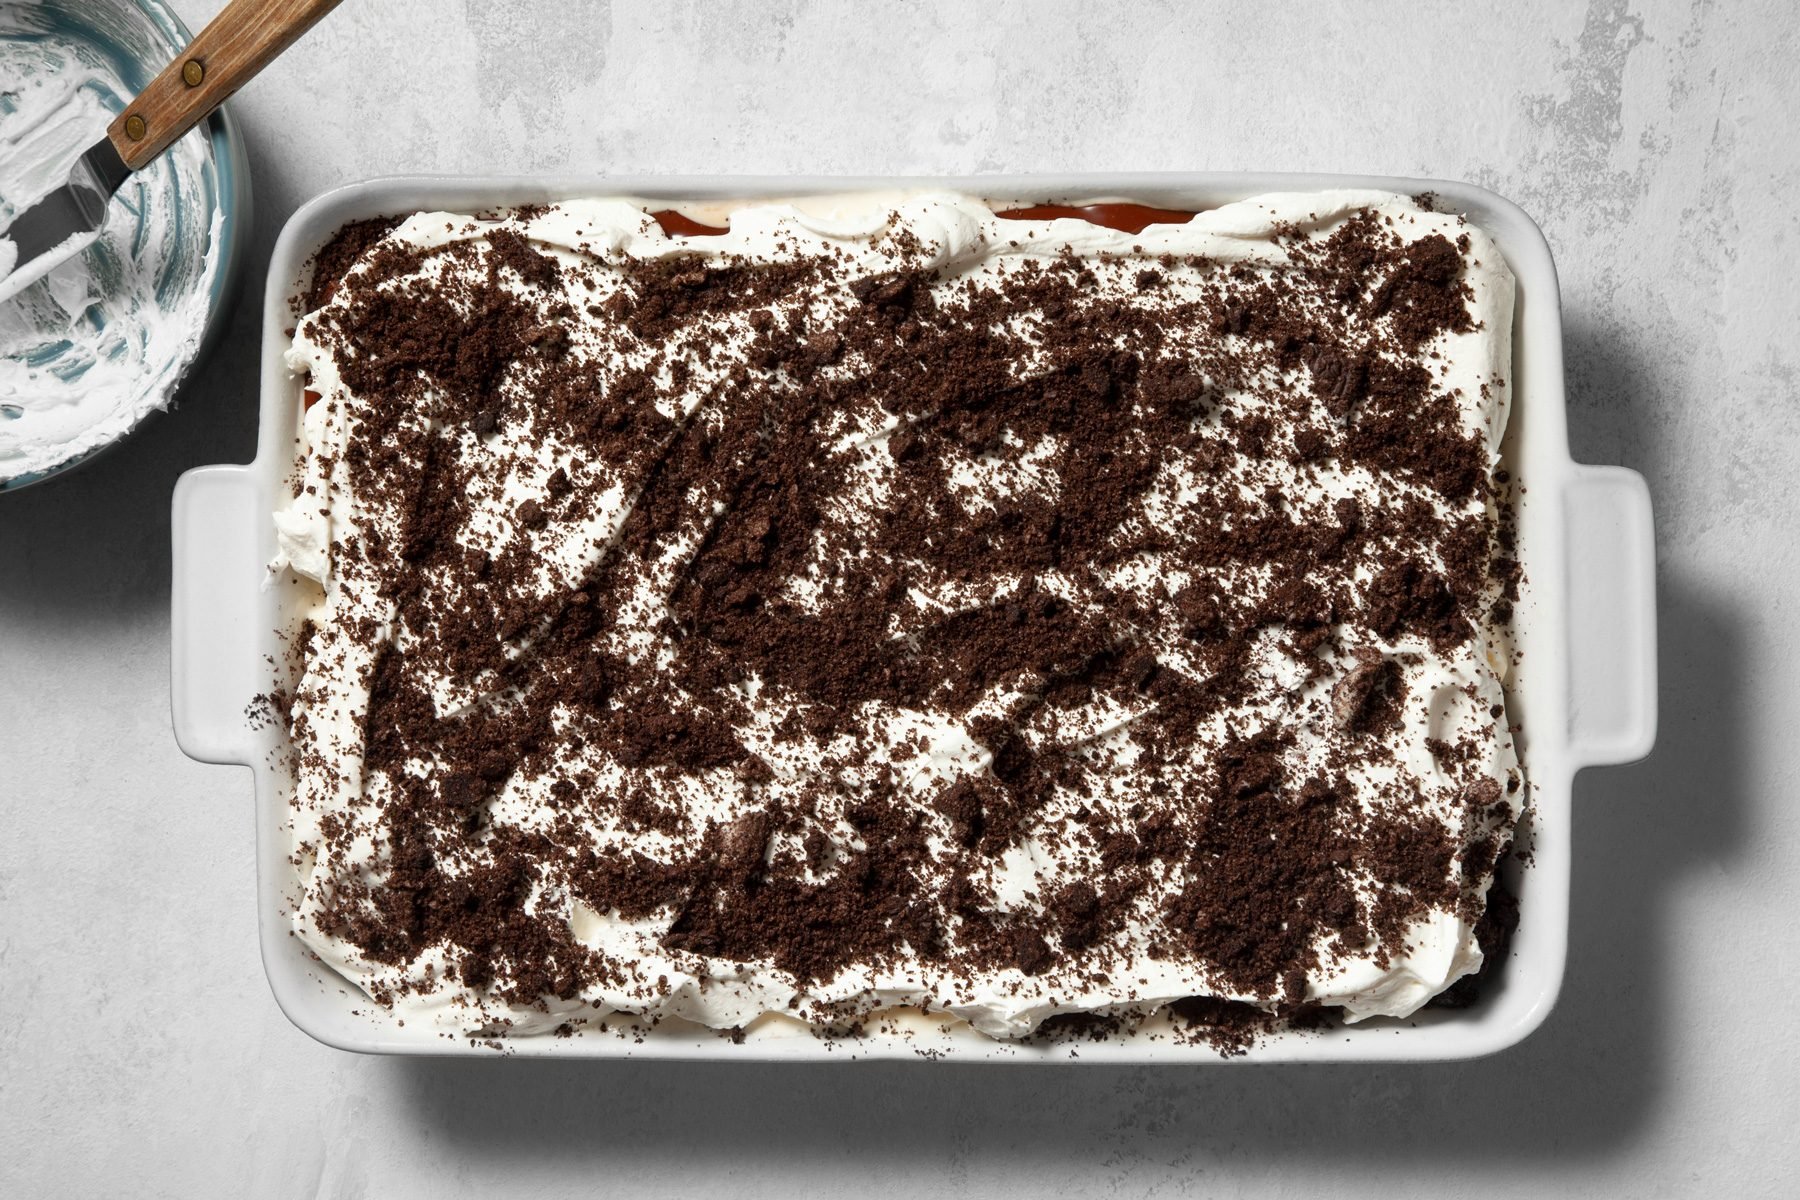 Top view of Oreo Ice Cream Cake in baking tray